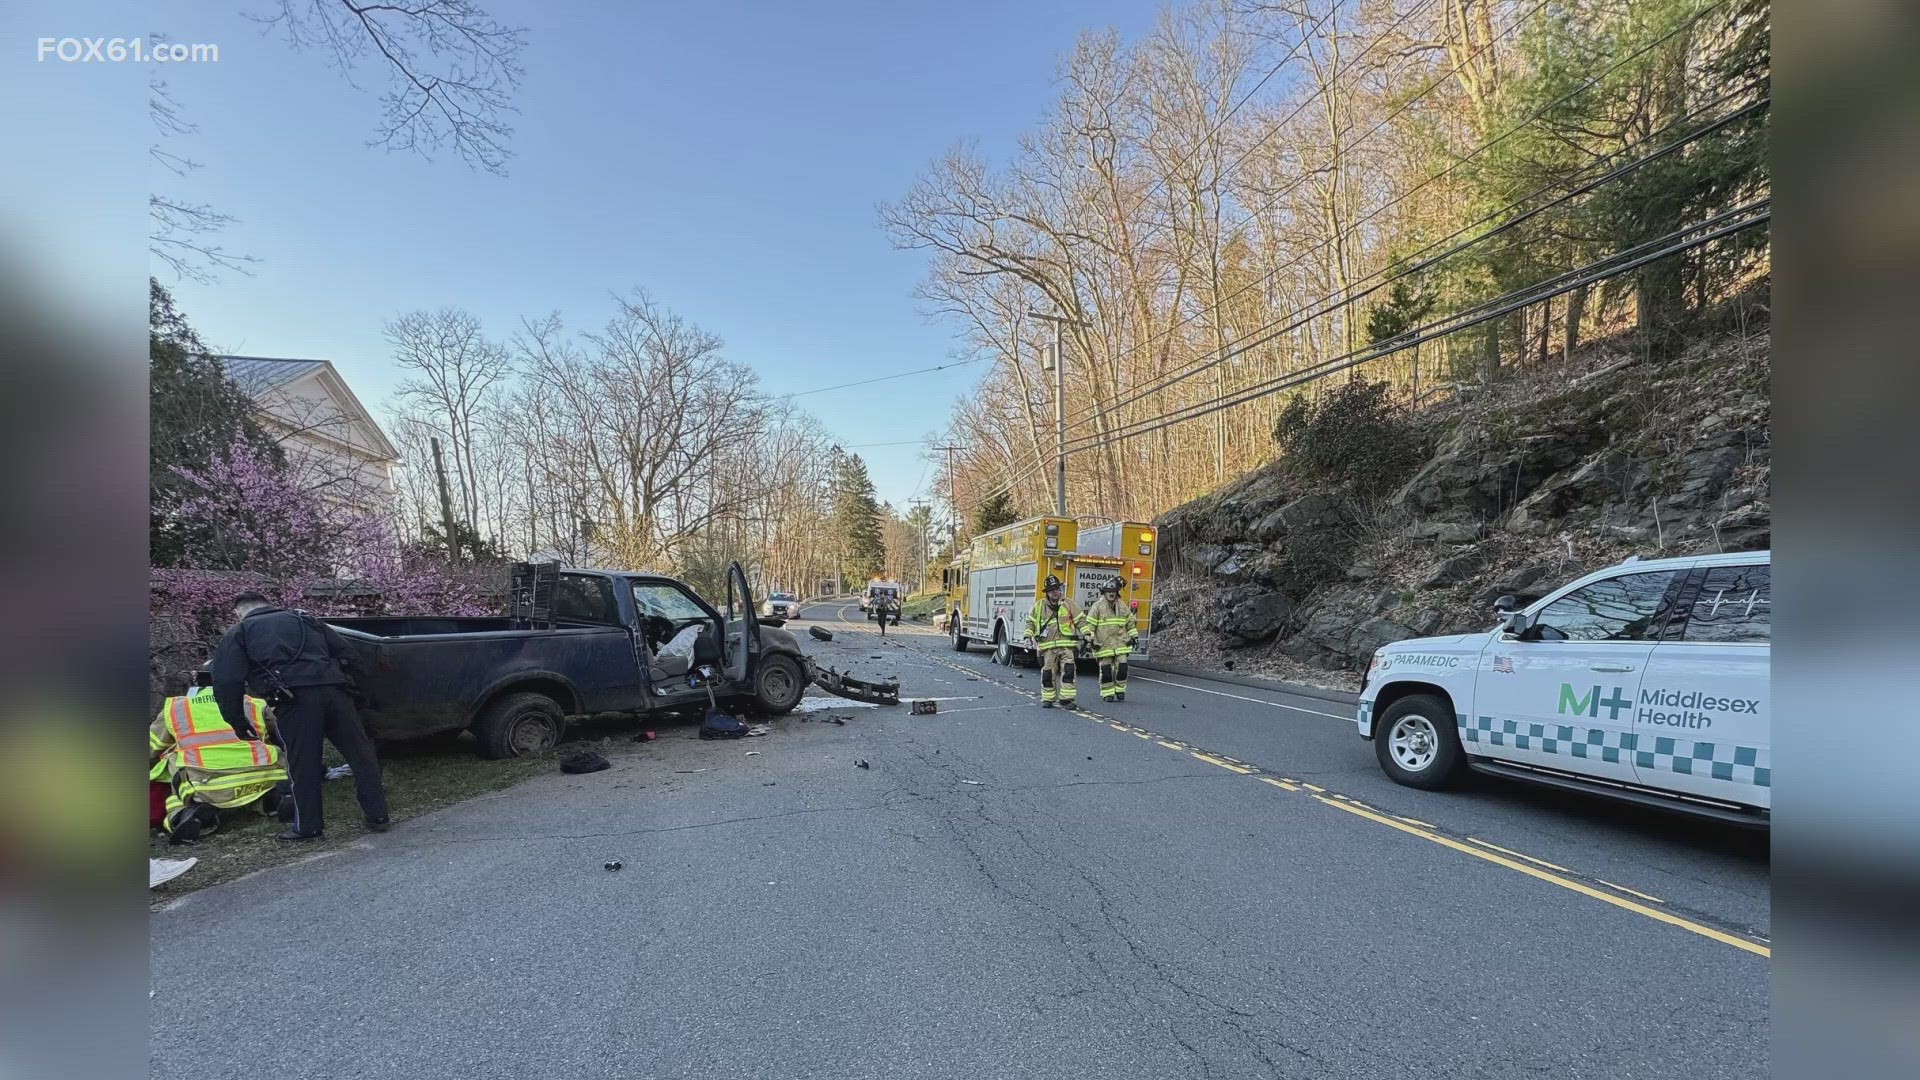 Both lanes of Saybrook Road were closed while state police investigated the crash, but they said that it has since reopened.